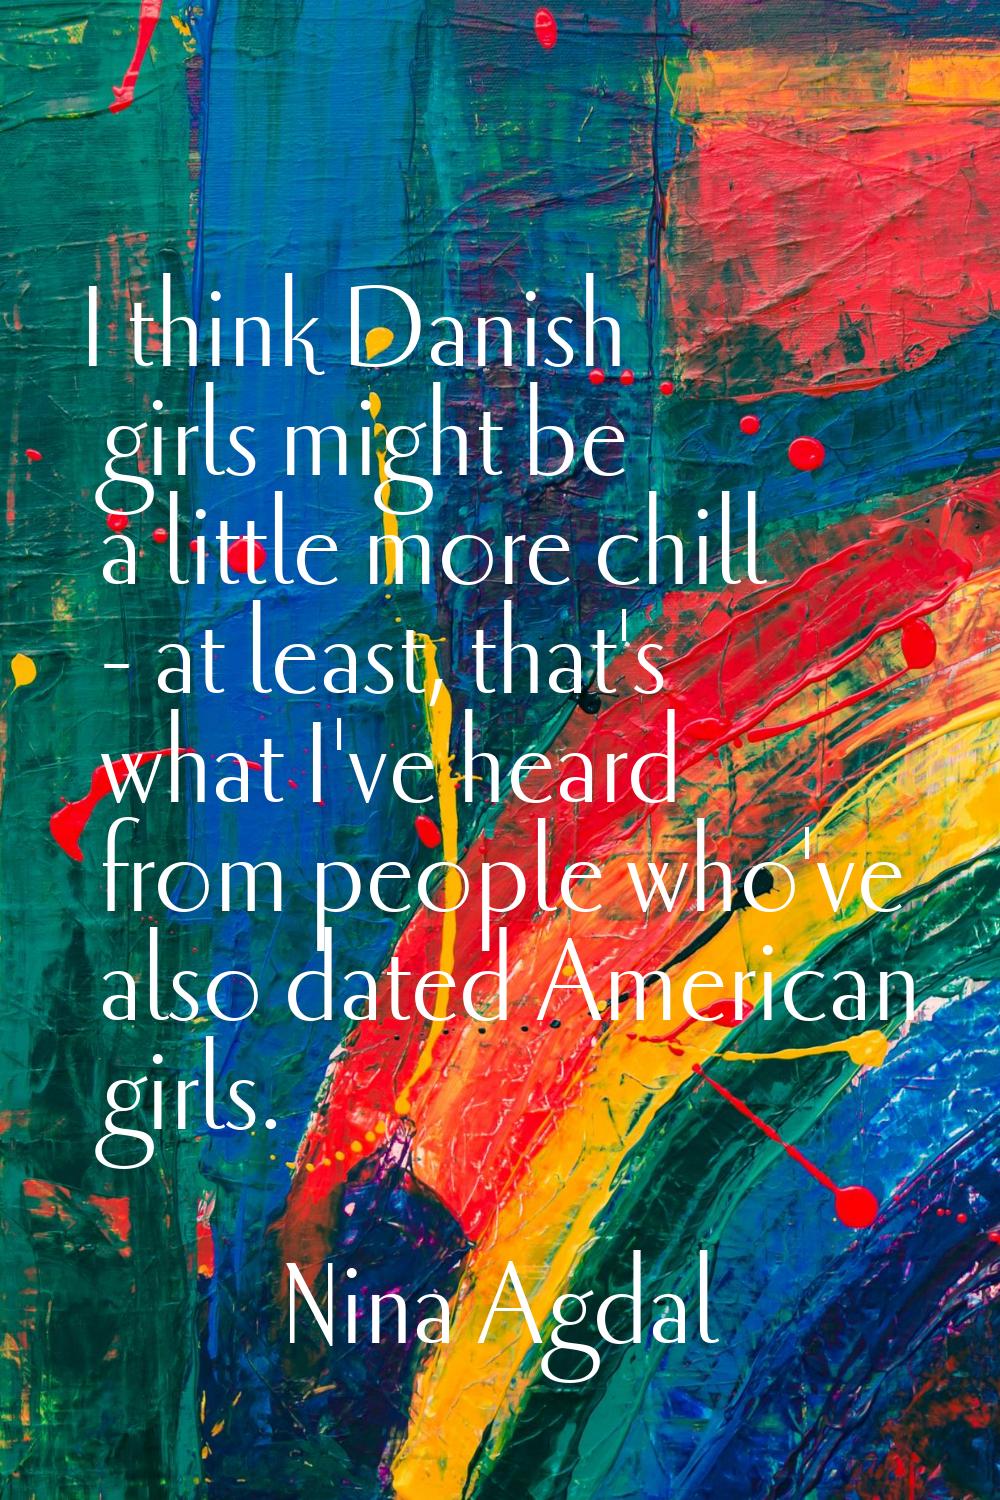 I think Danish girls might be a little more chill - at least, that's what I've heard from people wh